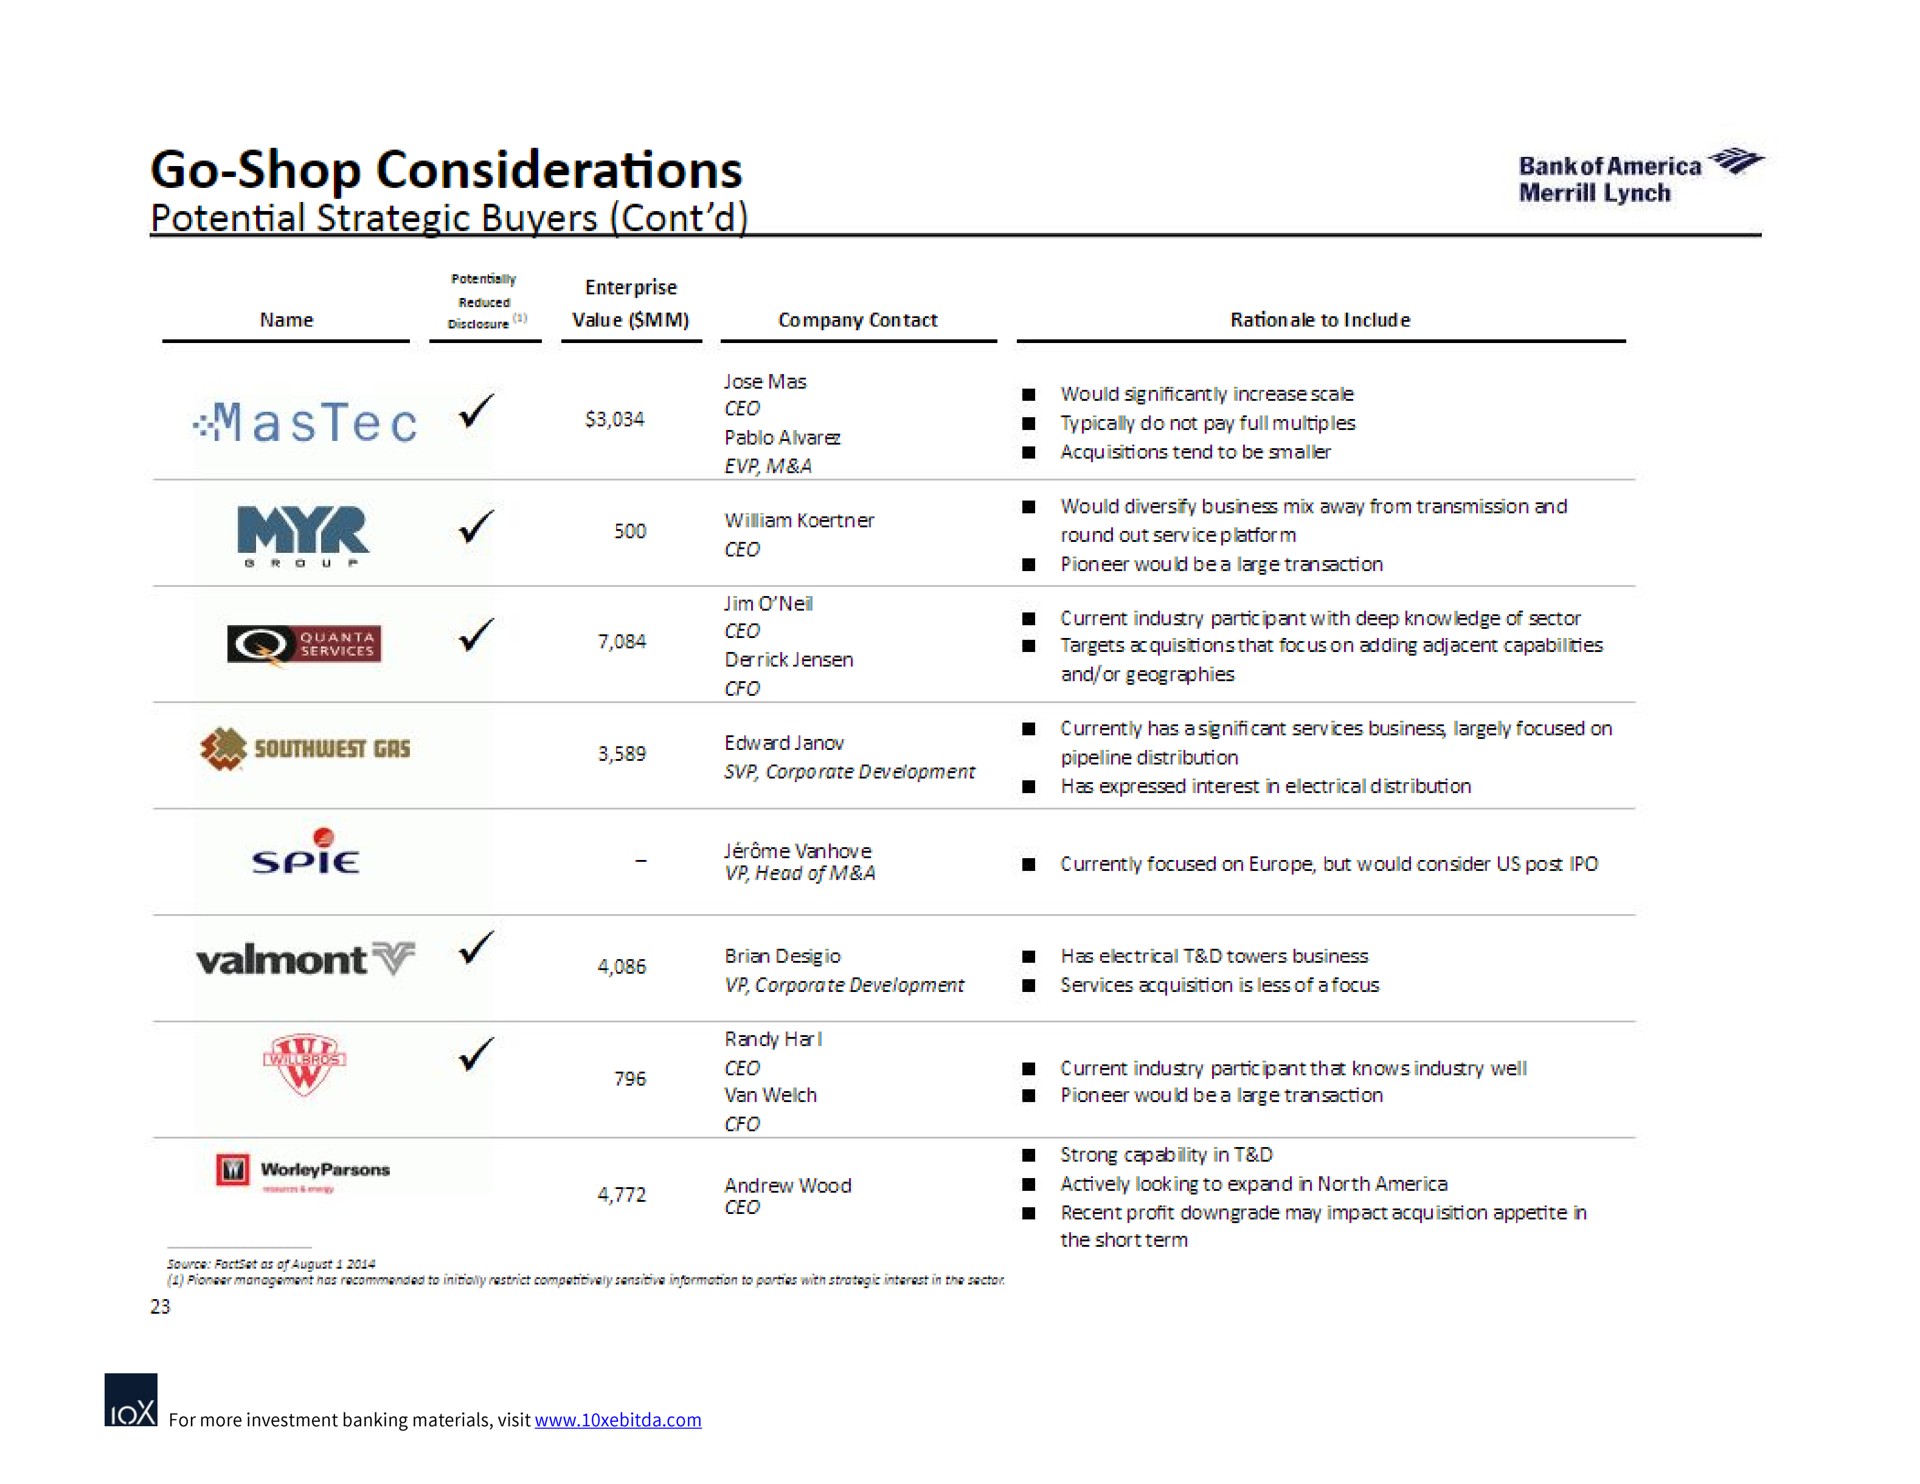 go shop considerations potential strategic buyers | Bank of America